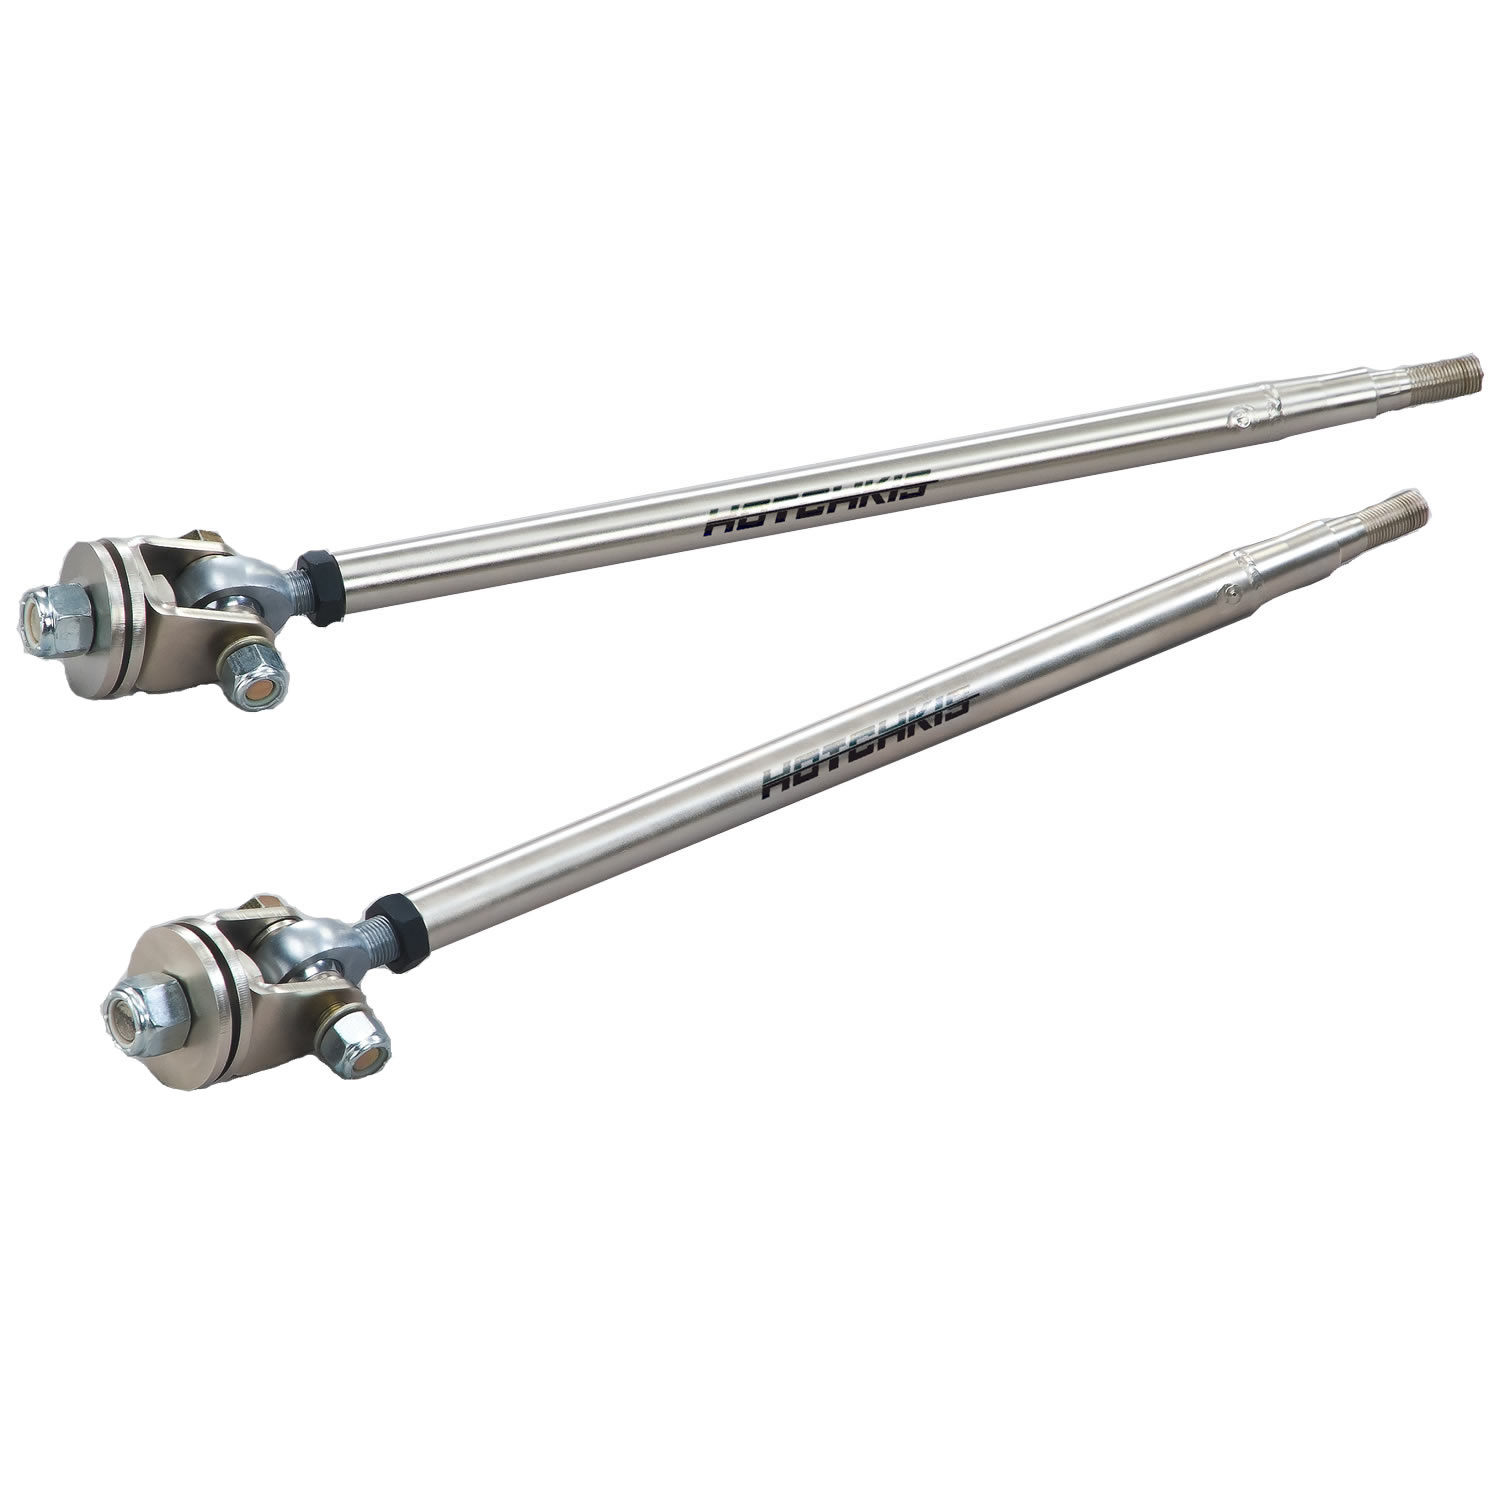 67-70 Dodge B and E Body Adjustable Strut Rods from Hotchkis Sport Suspension